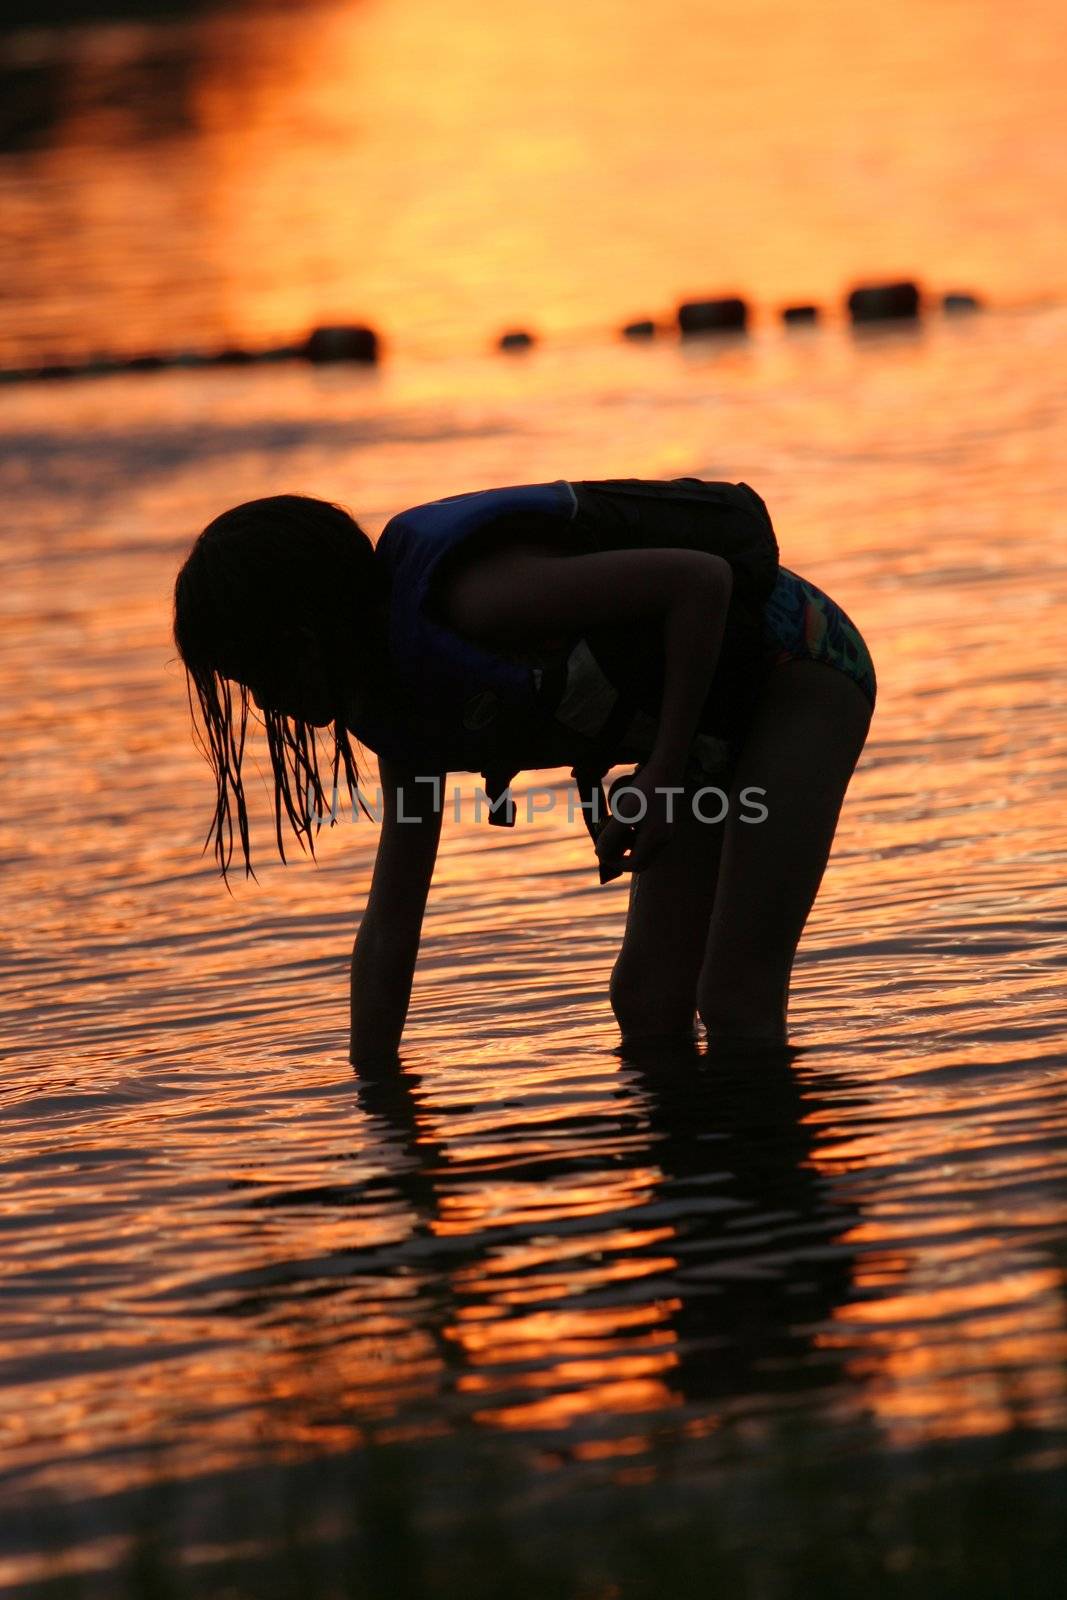 Little girl searching for shells at sunset by jarenwicklund